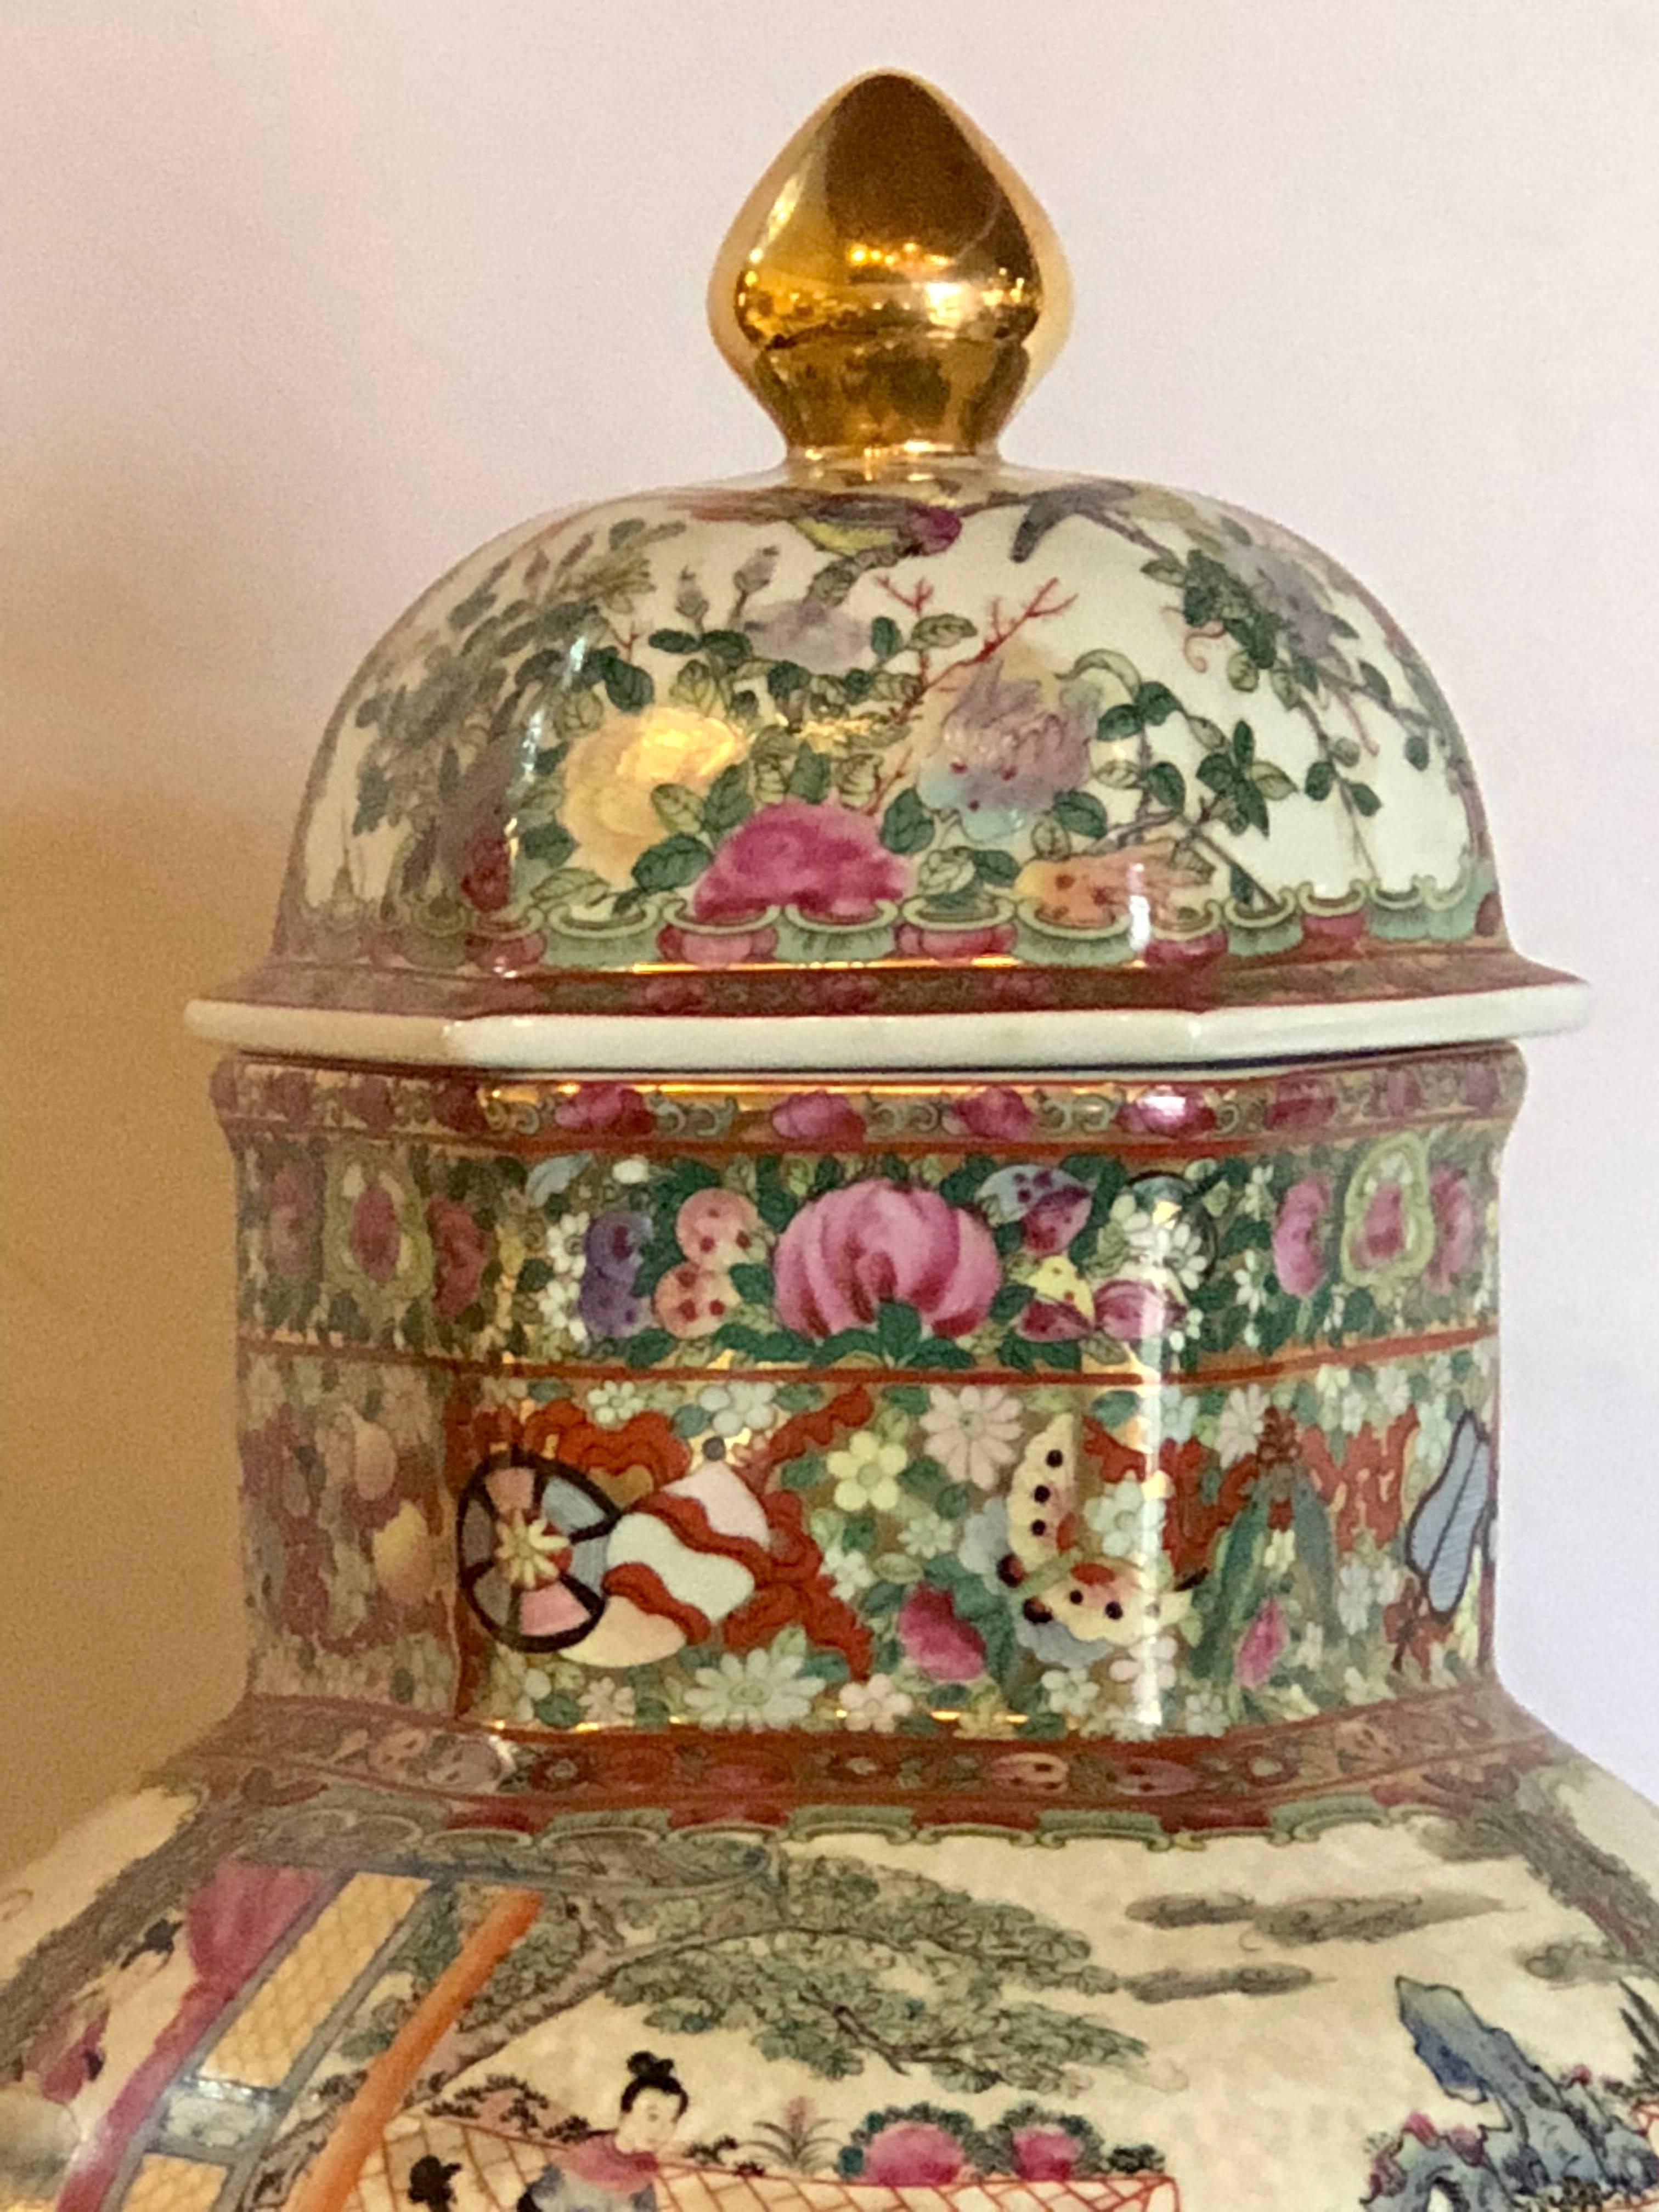 19th century (?) rose Medellin large covered jar Ching Dynasty. Provenance P.M. Tung Arts. Originally purchased from the Manhattan Art and Antique Center as seen in the photos.